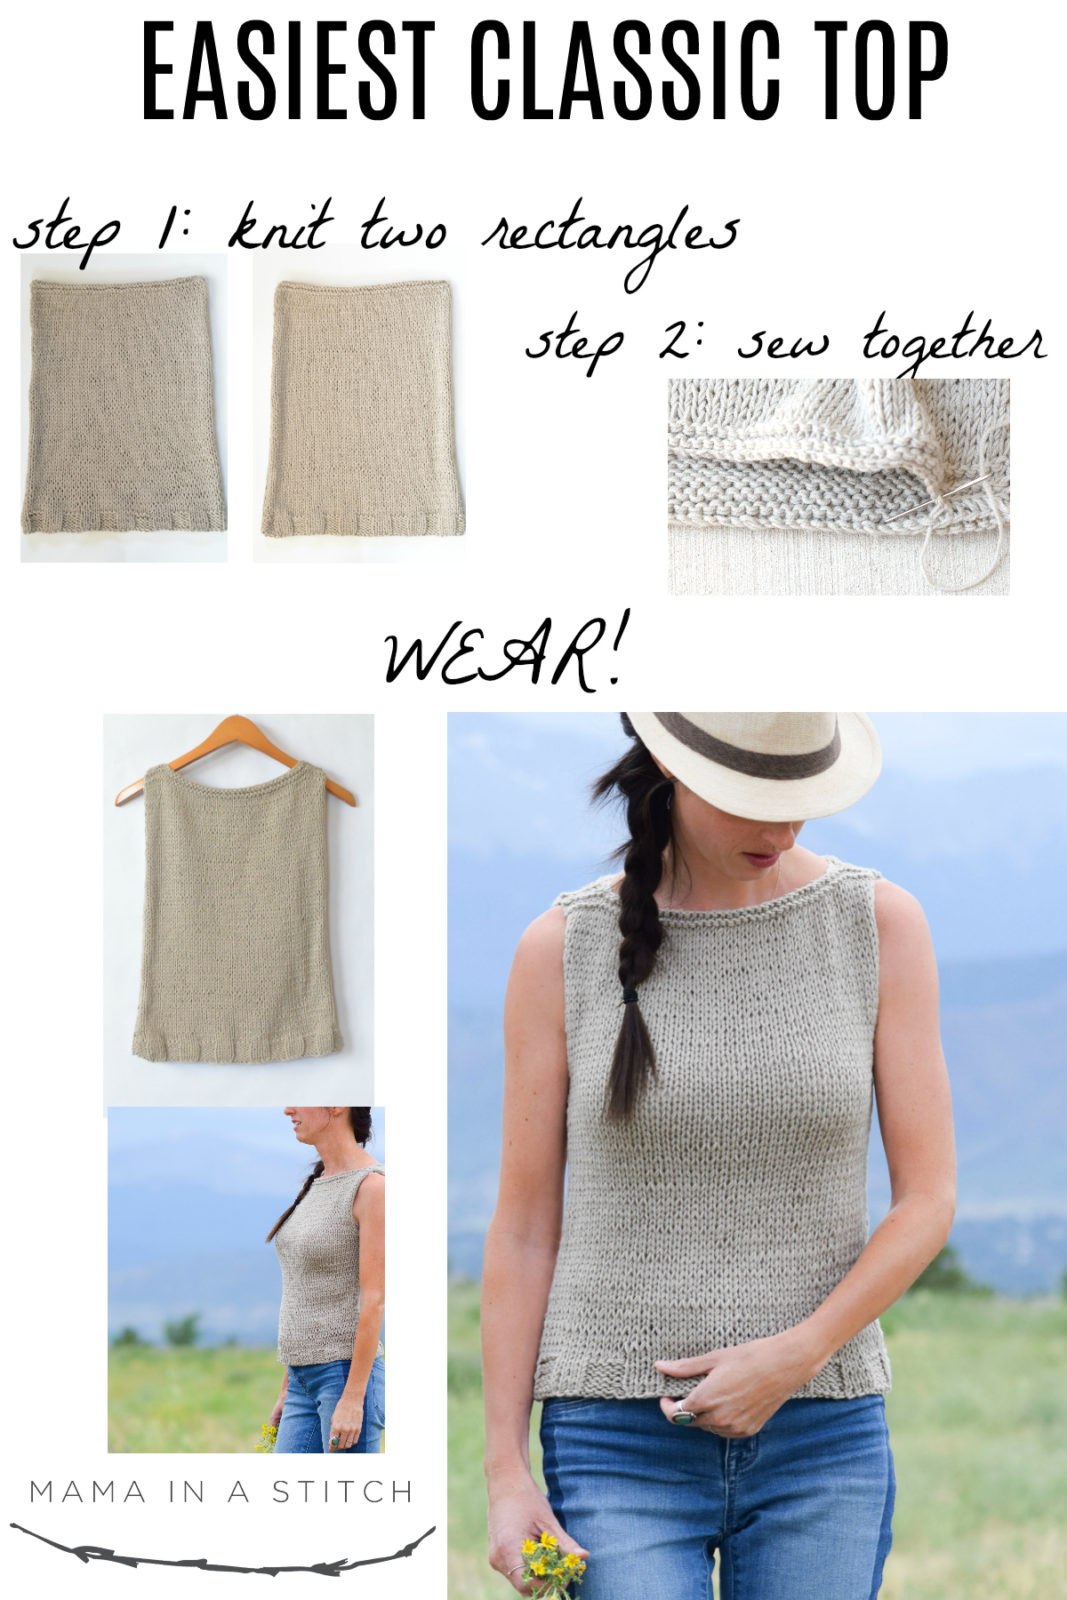 10 Best Knitted Tank Top Patterns for Summer